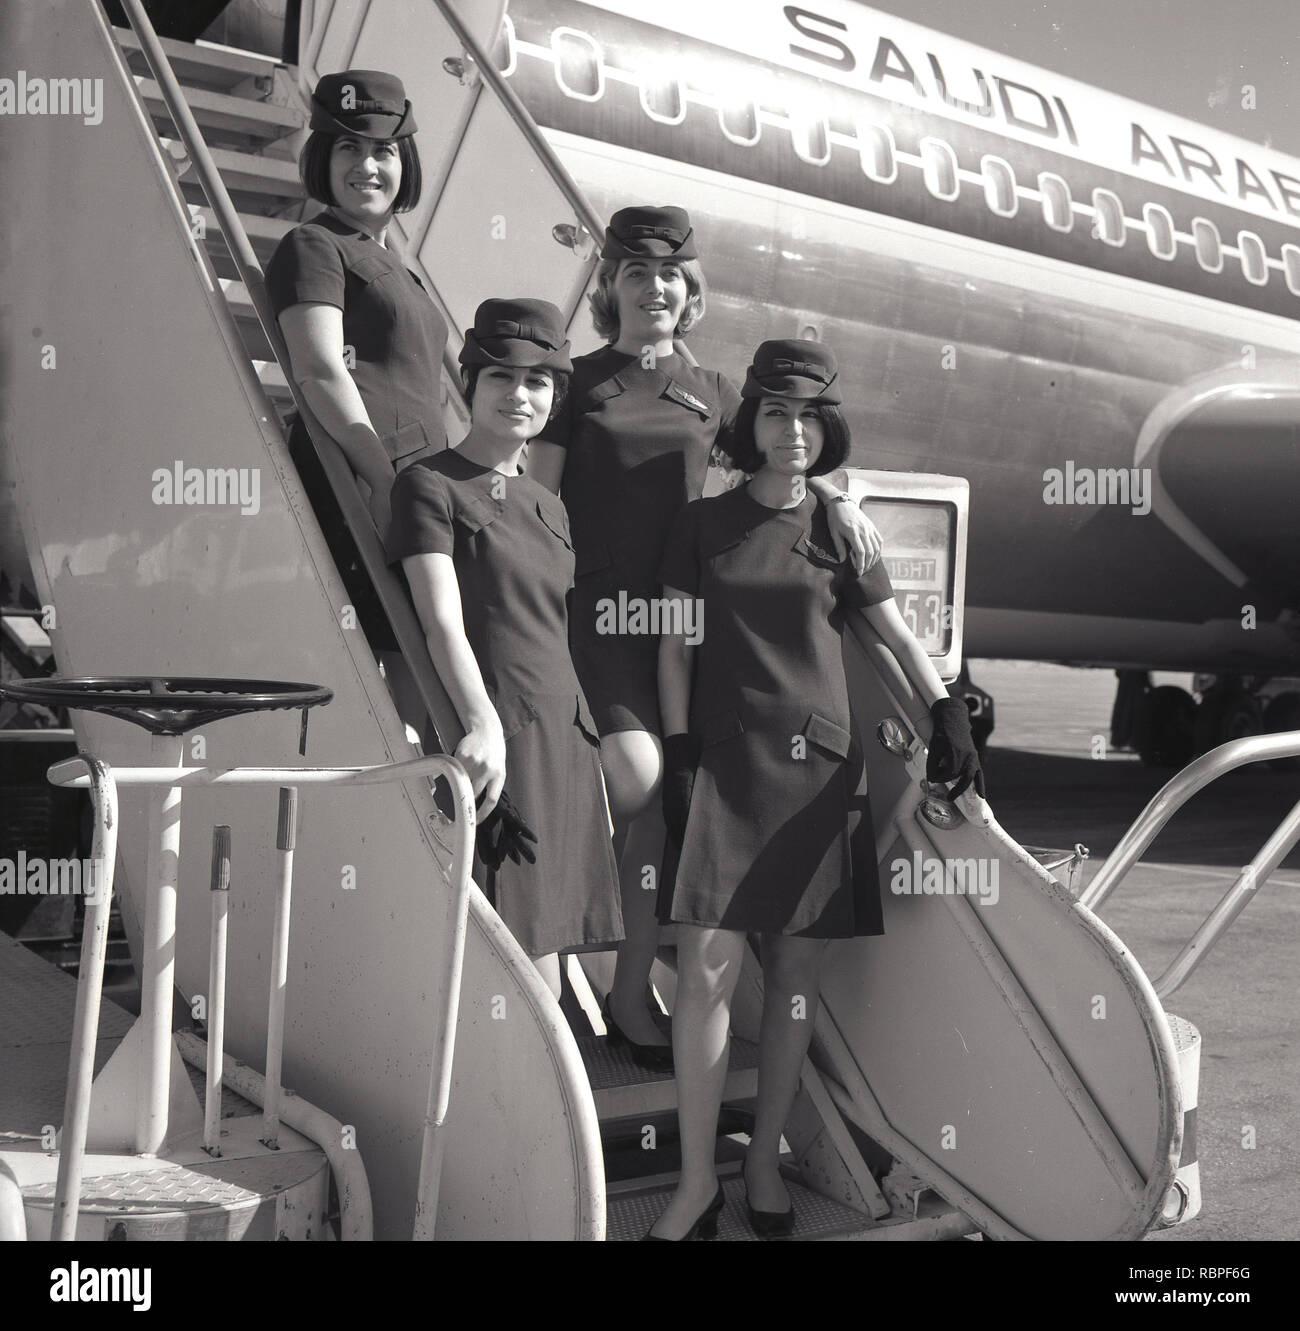 1960s, historical, female air hostesses of Saudi Arabian Airlines standing outside on the boarding stairs to the aircraft. Stock Photo